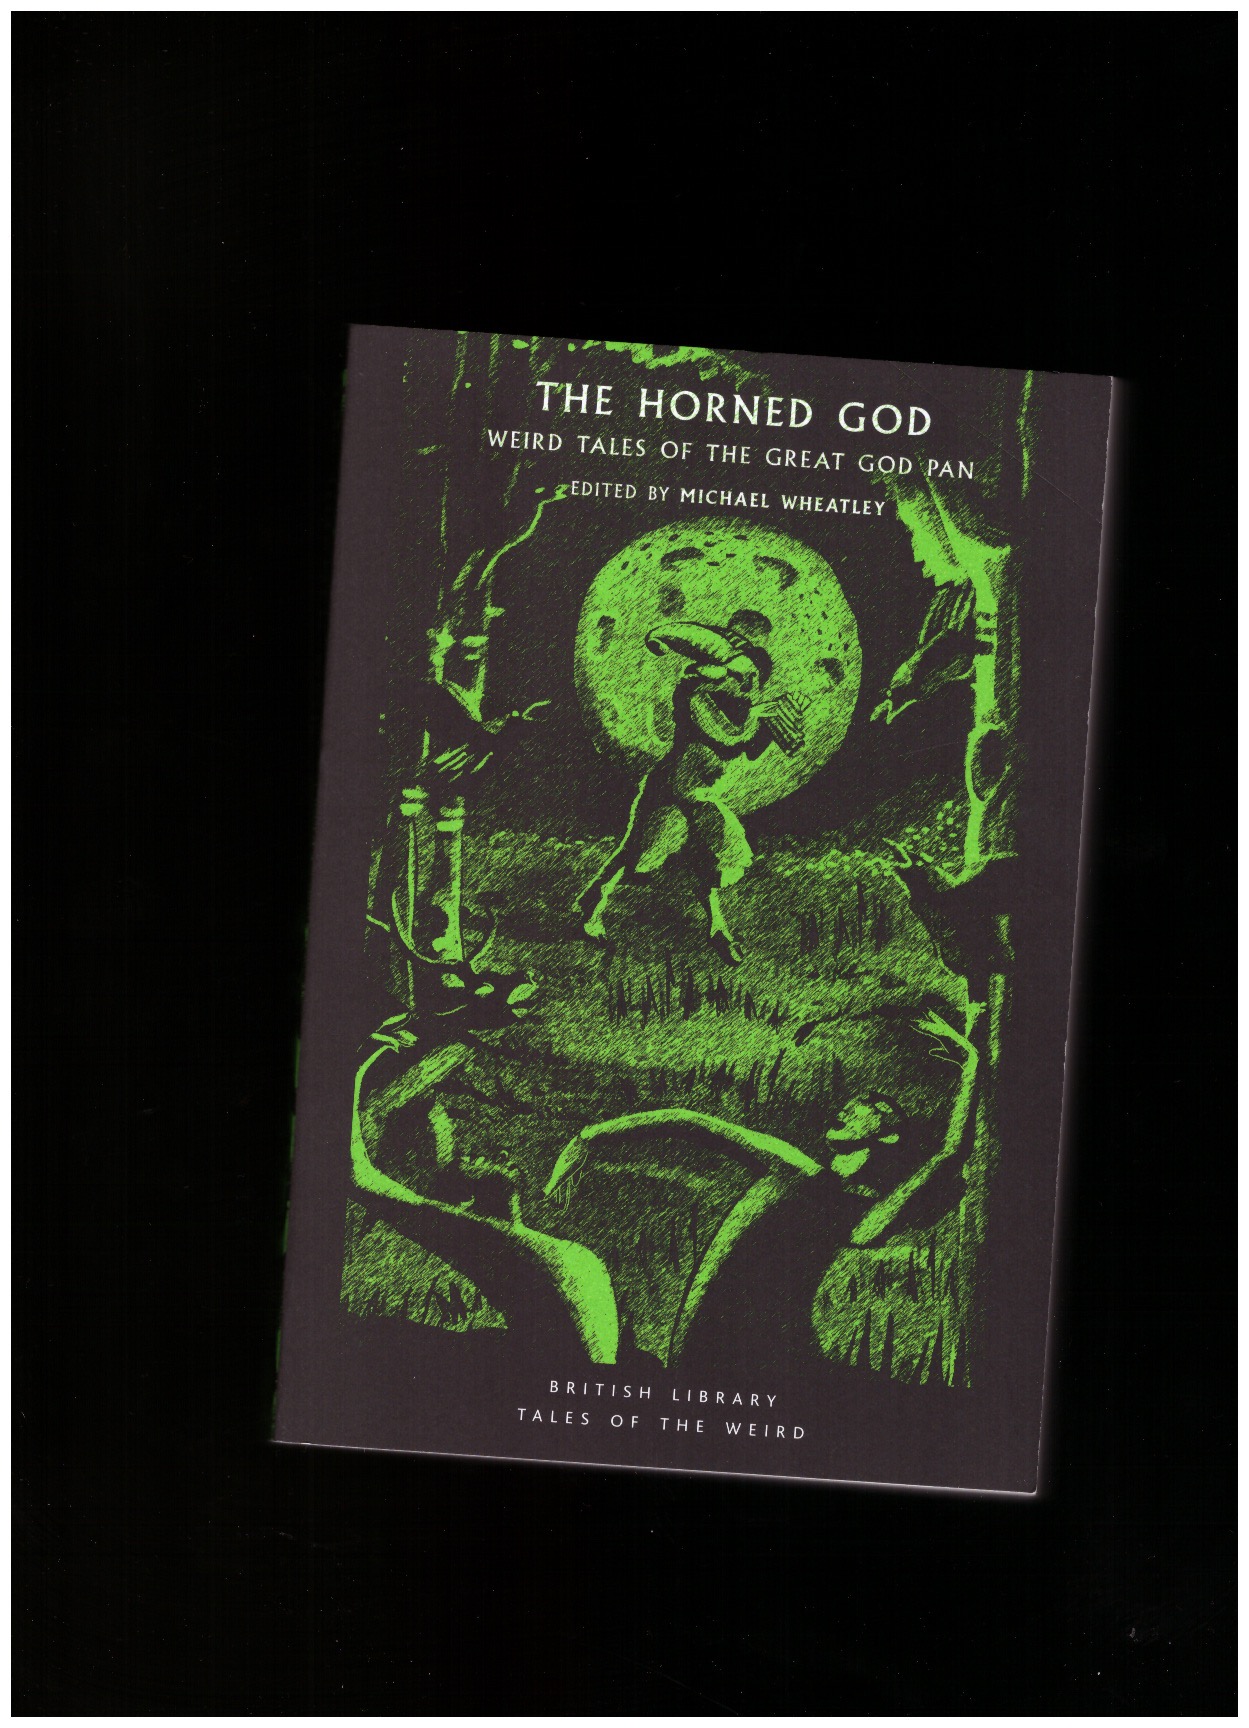 WEATHLEY, Michael (ed.) - The Horned God. Weird Tales of the Great God Pan